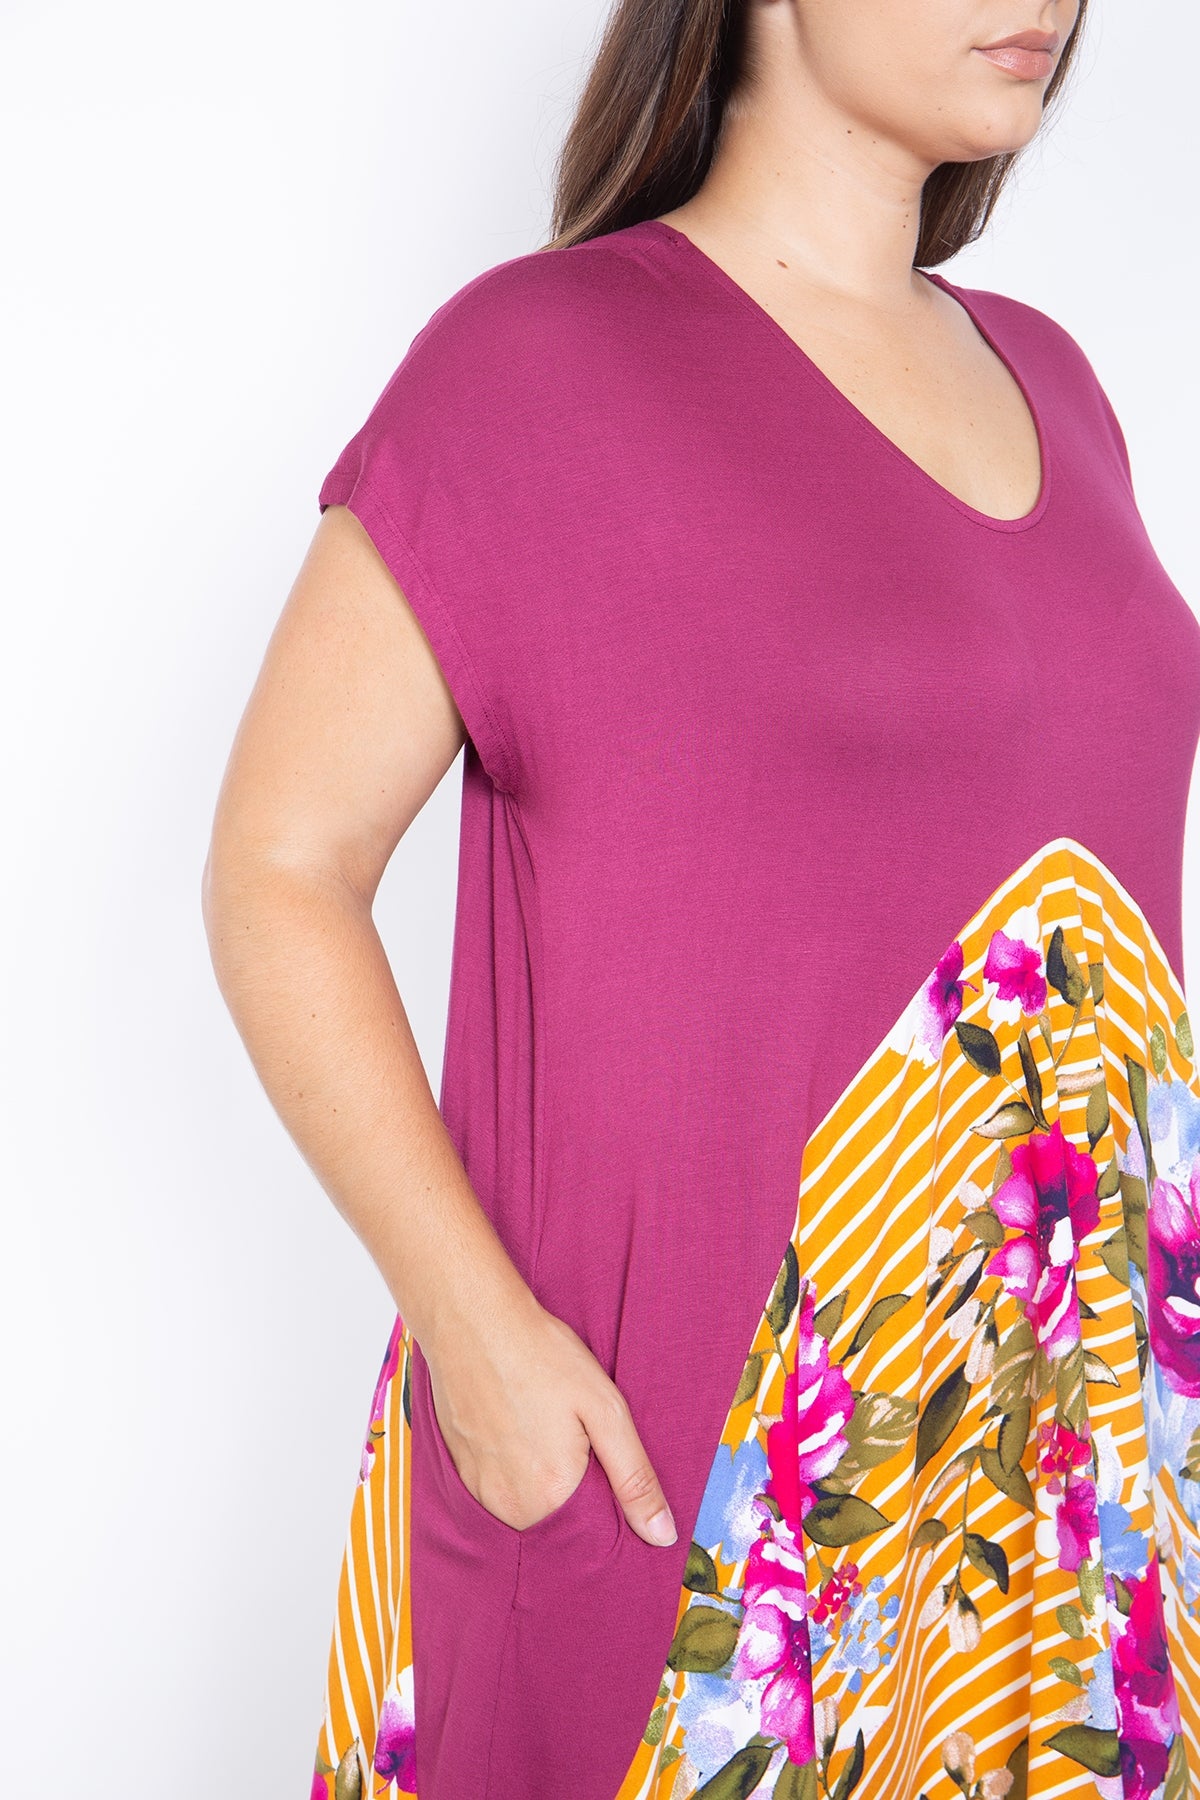 MARSALA MUSTARD PLUS SIZE DRESS (NOW $ 3.50 ONLY!)